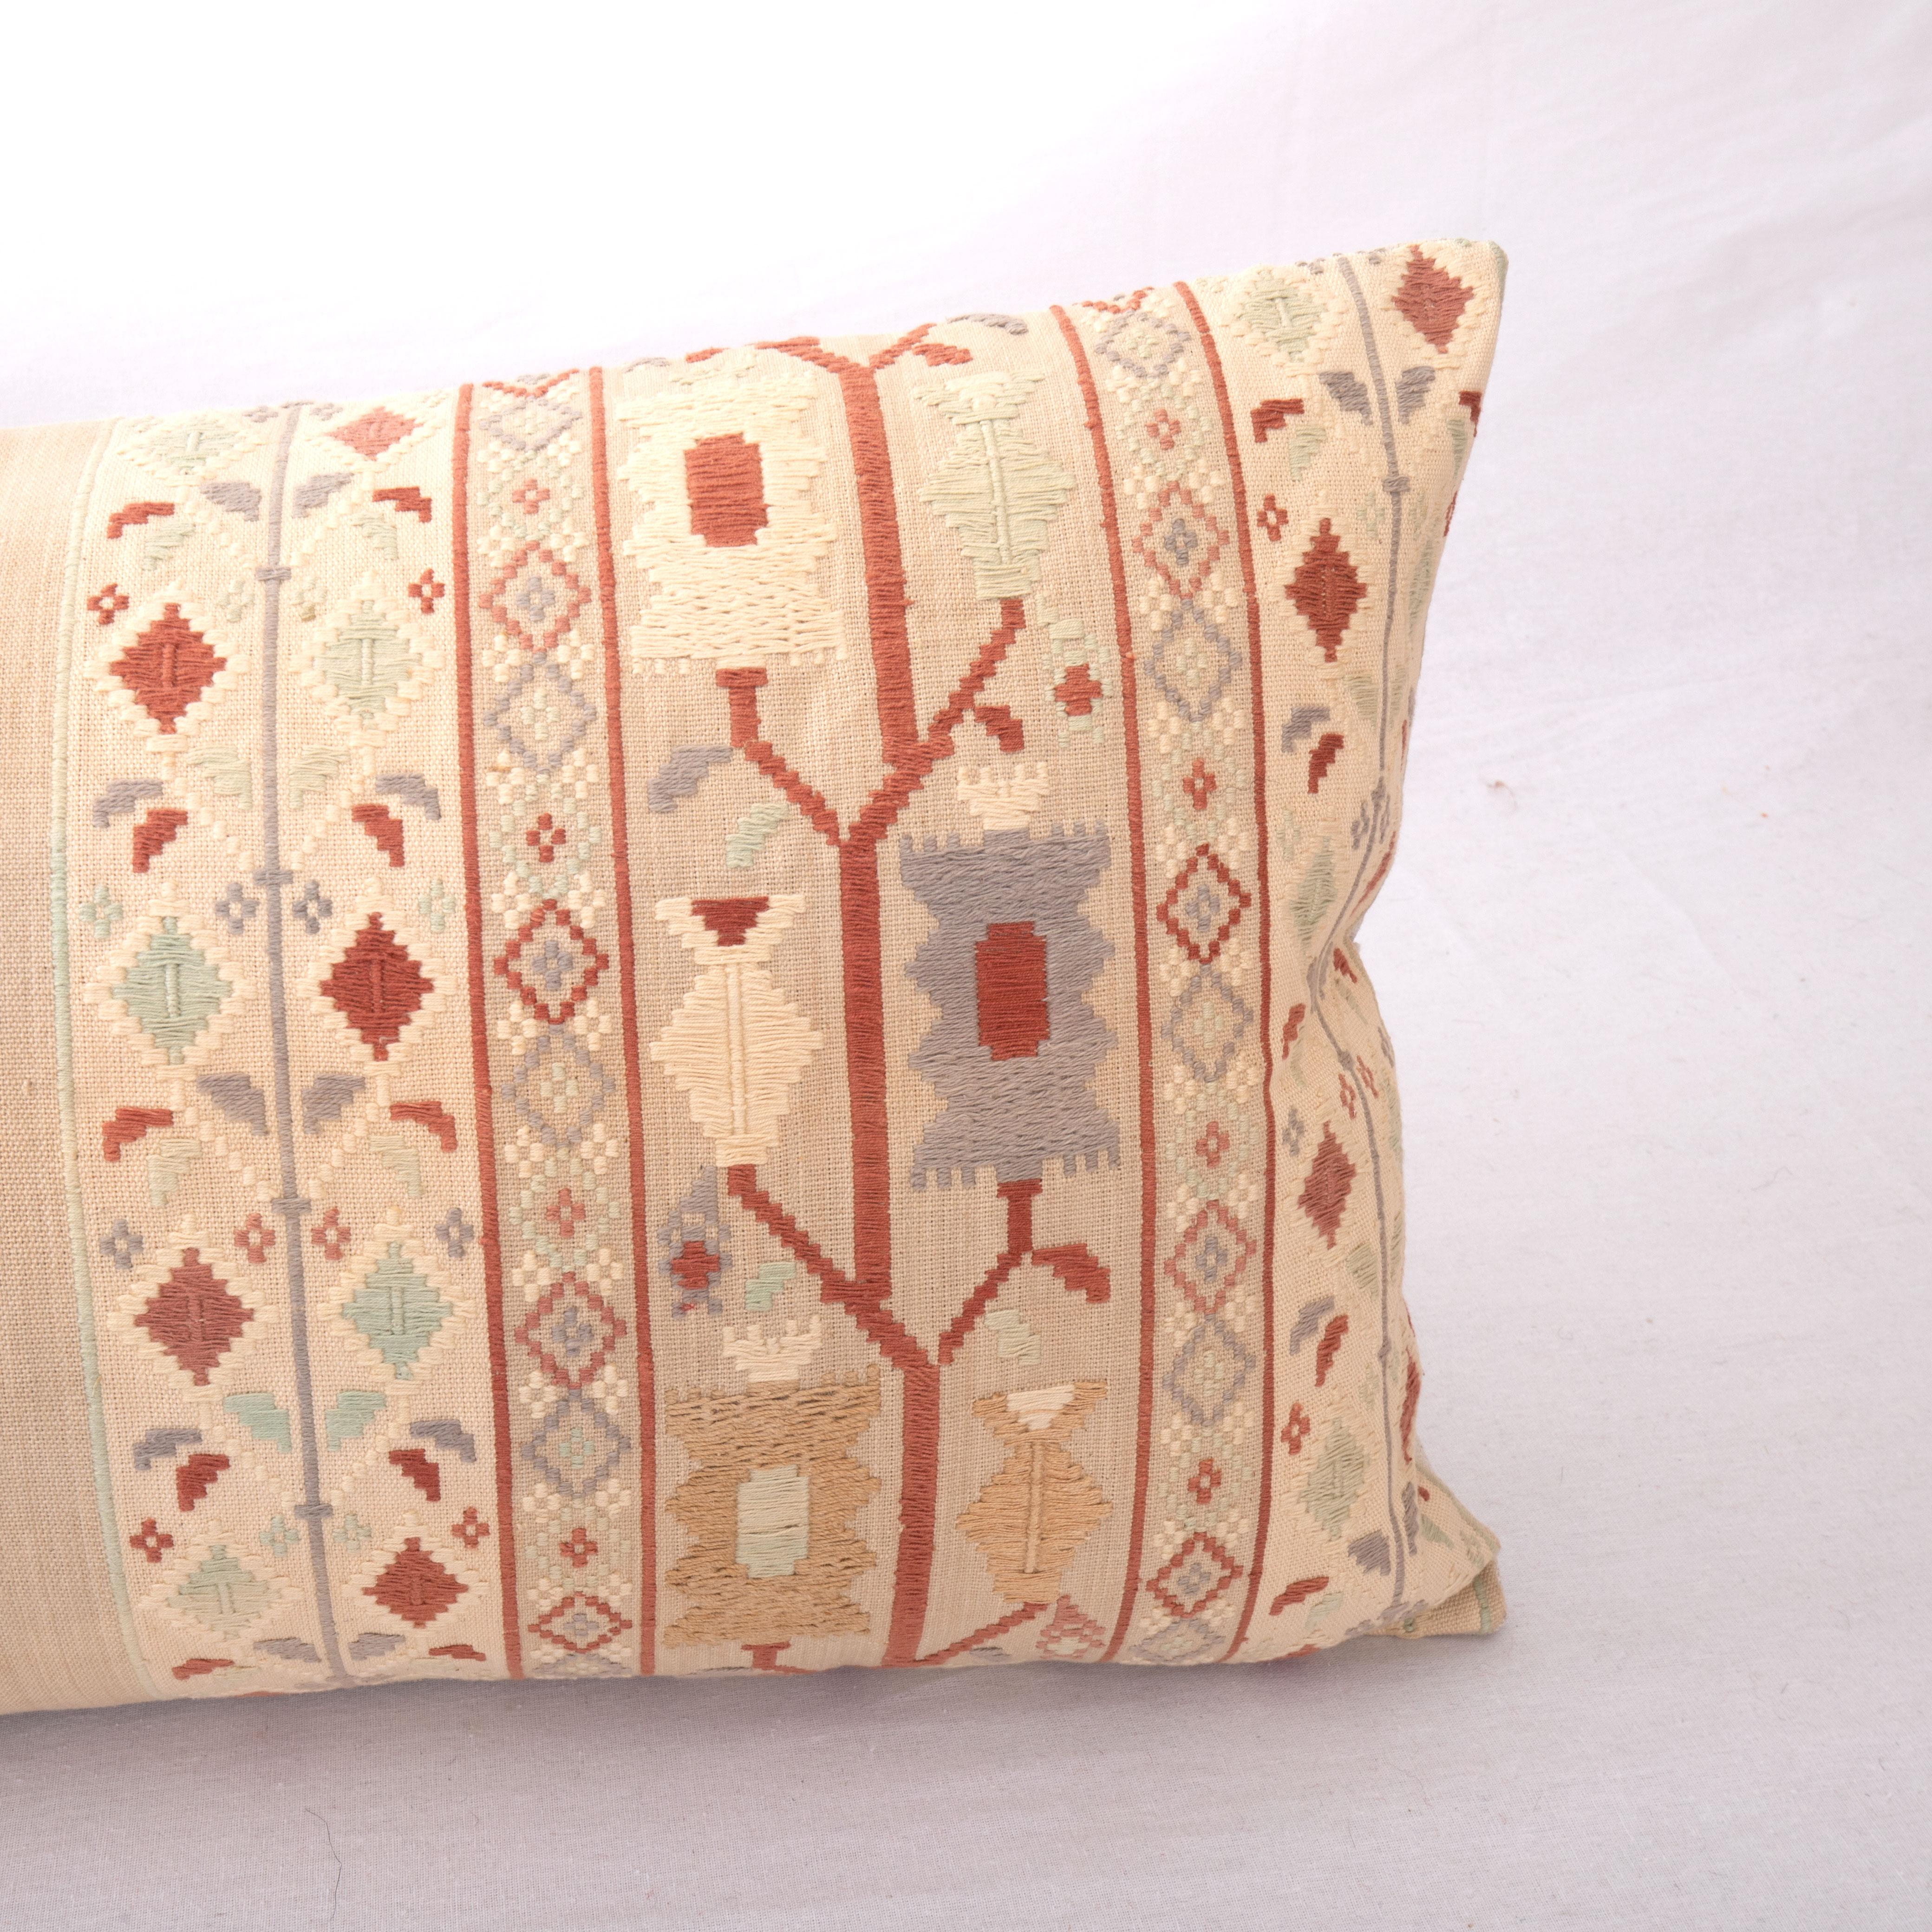 Woven Pillow Cover Made From a Vintage East European Linen and Cotton Textile For Sale